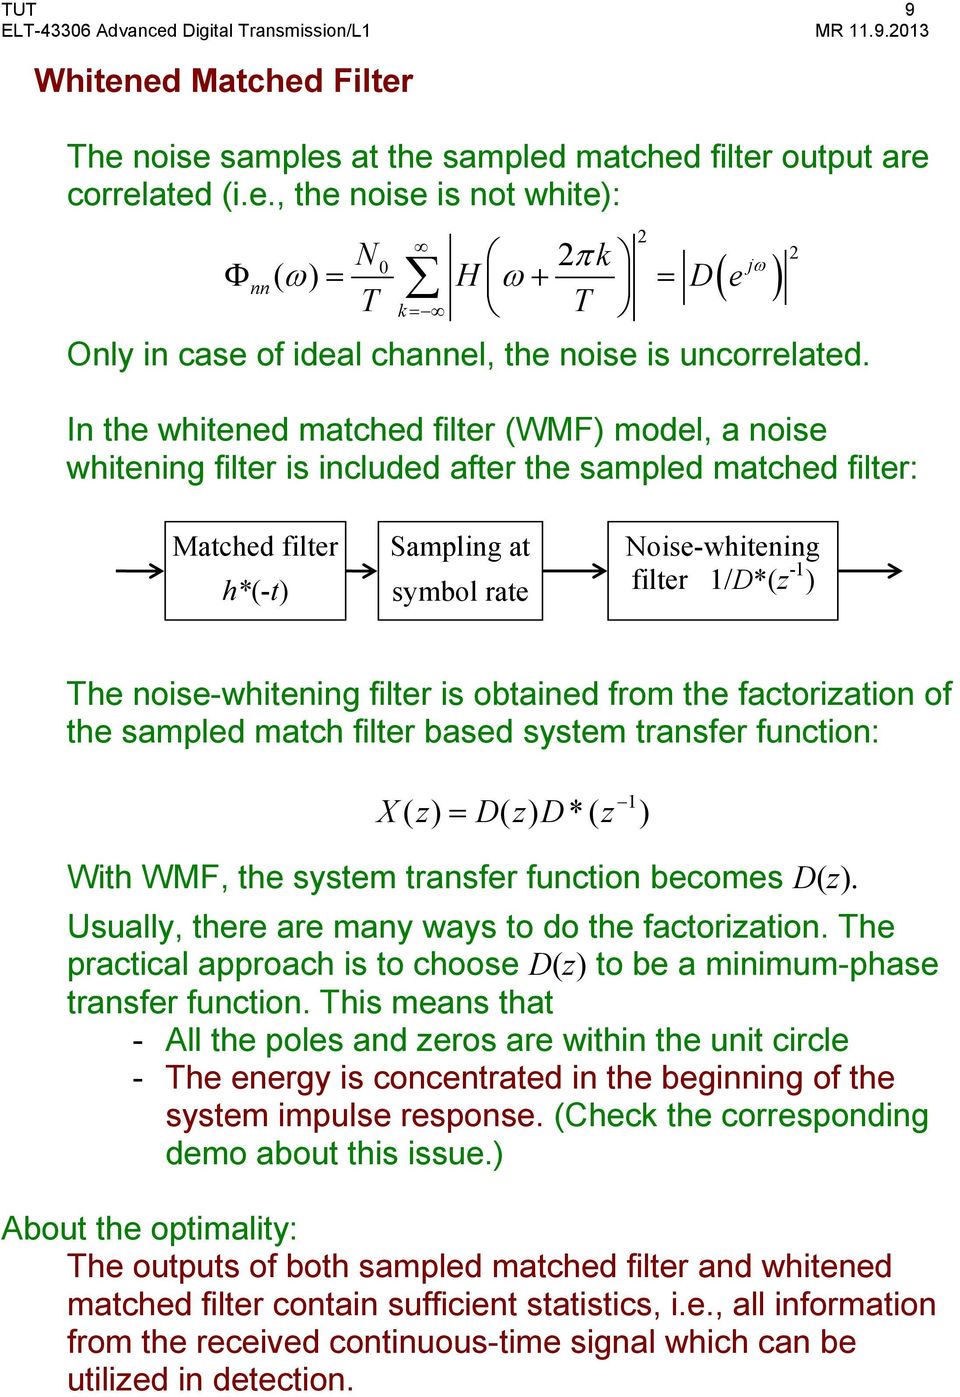 noise-whitening filter is obtained from the factorization of the sampled match filter based system transfer function: X z DzD z ( ) = ( ) *( ) With WMF, the system transfer function becomes D(z).